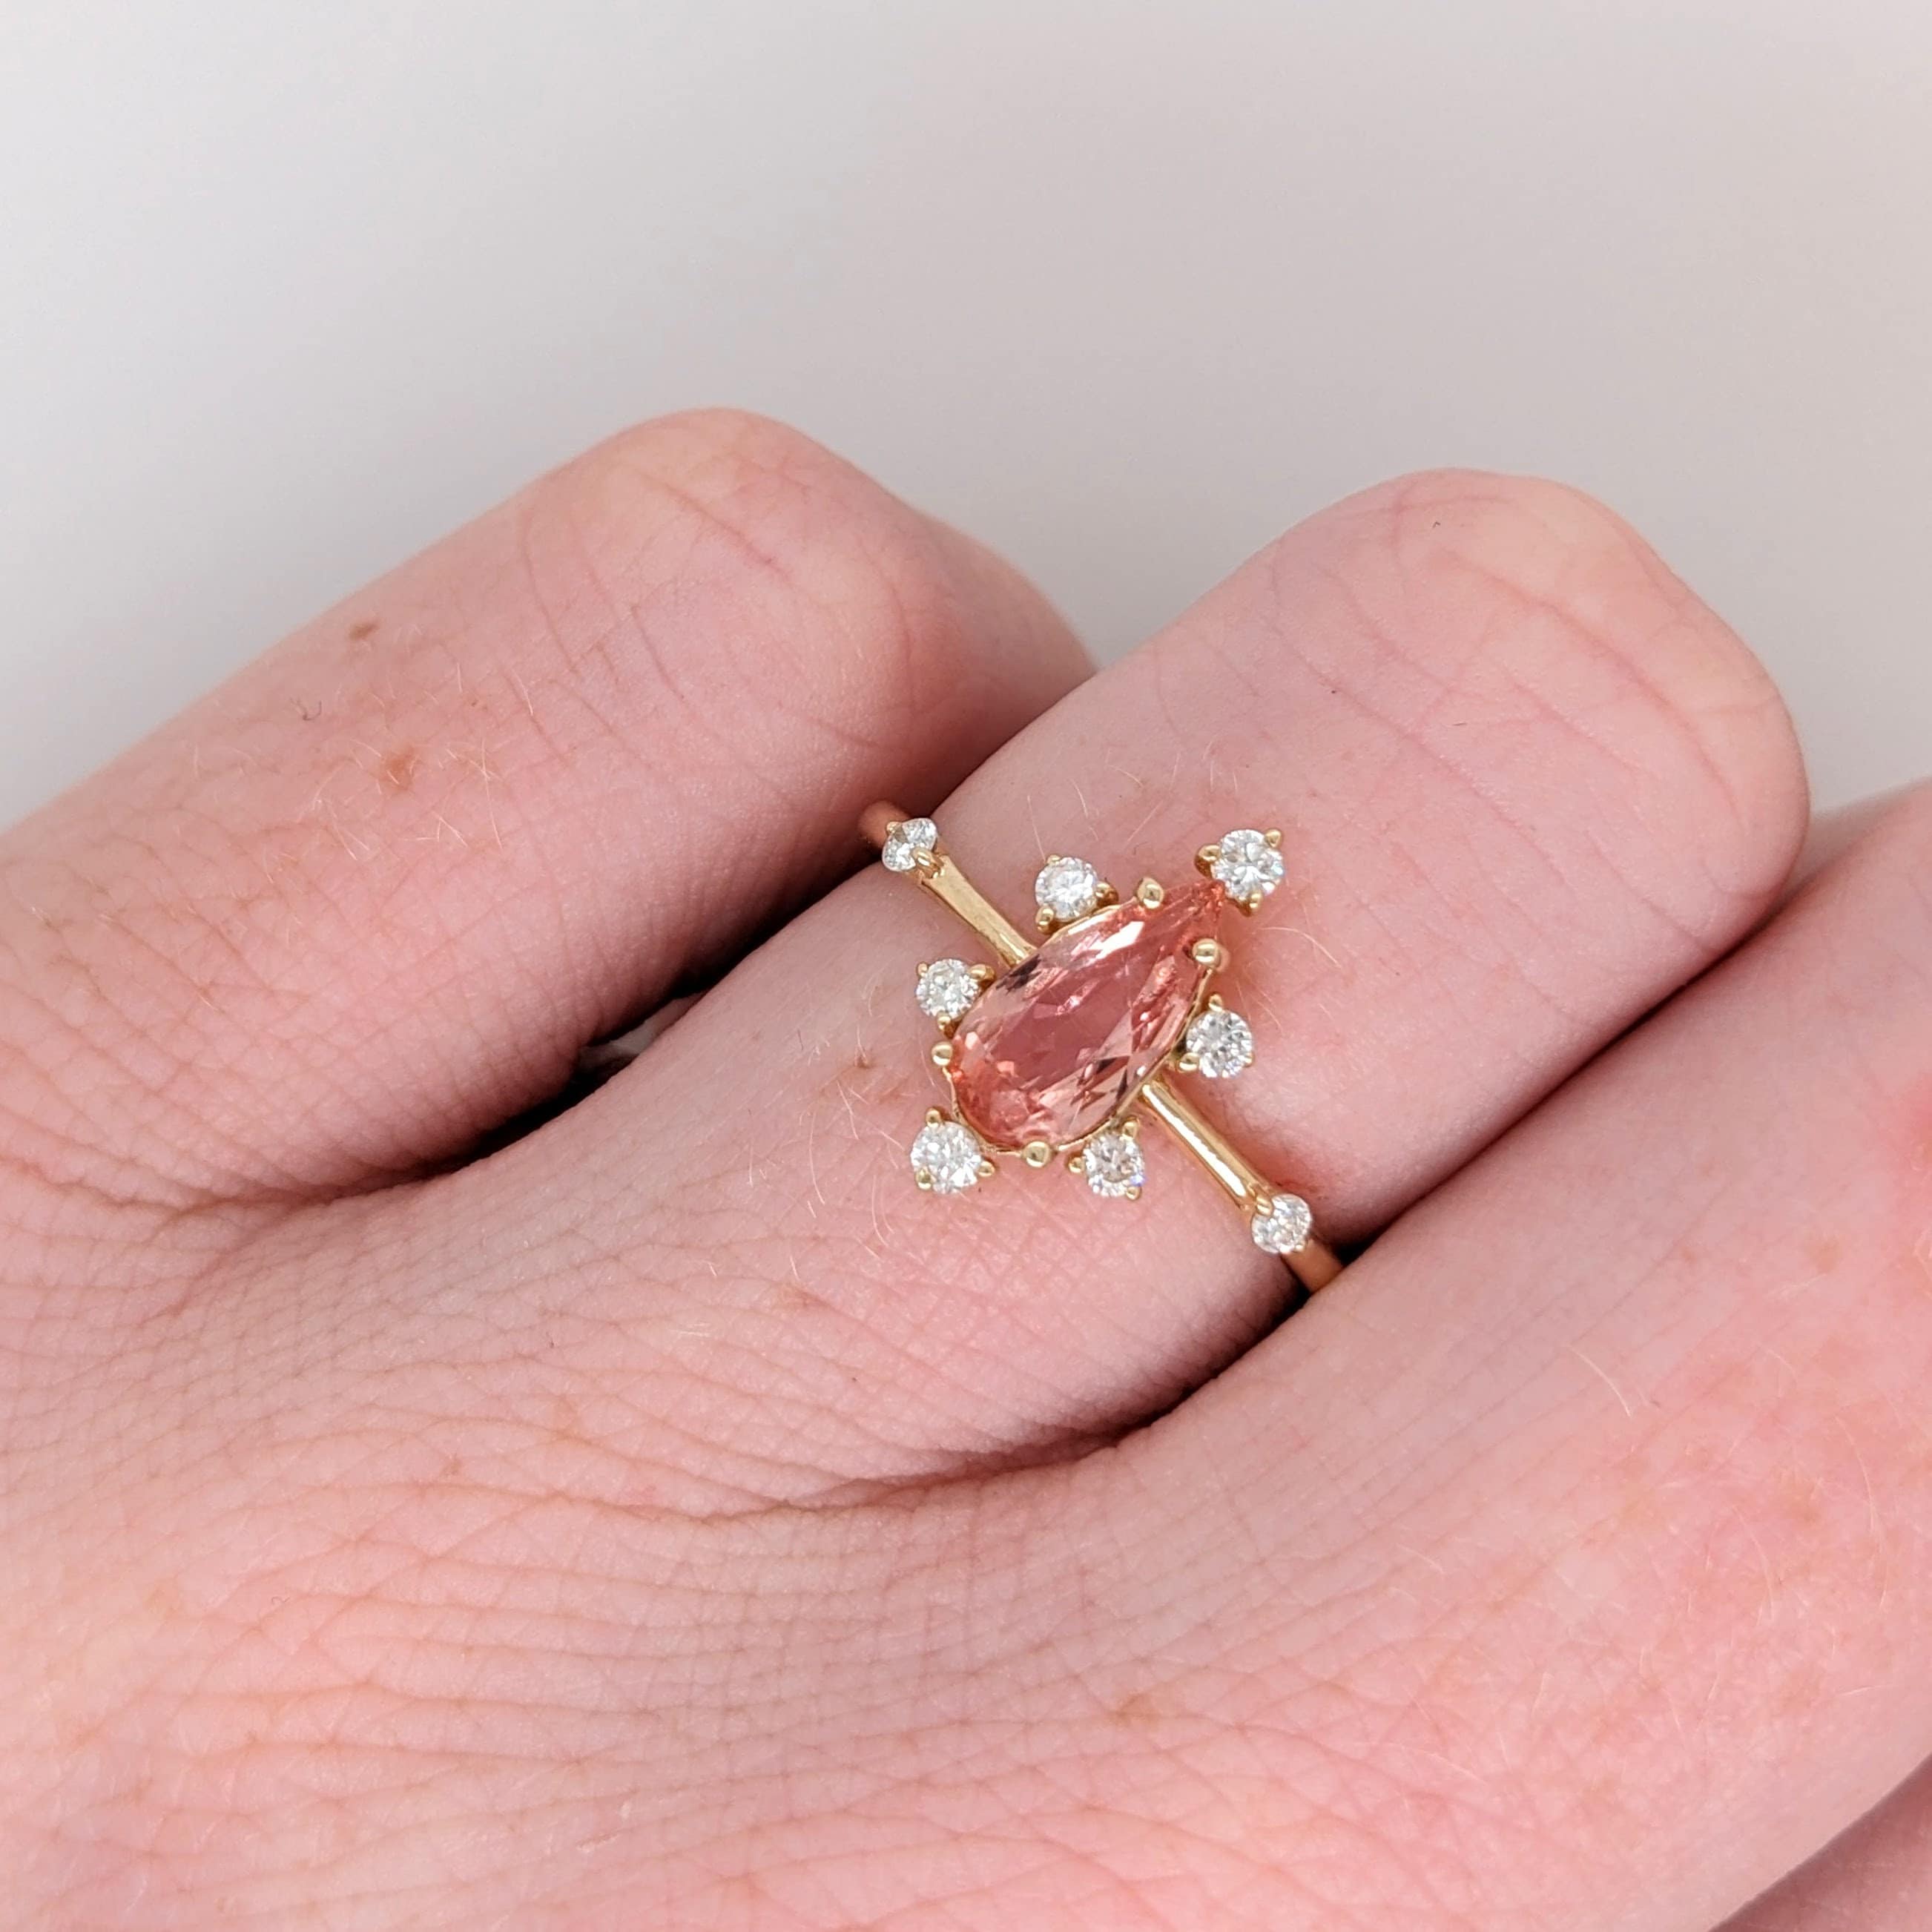 Pretty Pink Imperial Topaz in 14k Solid Yellow Gold w Diamond Accents | Pear Shape 9.2x4.5mm | November Birthstone | Pink Gem Ring |